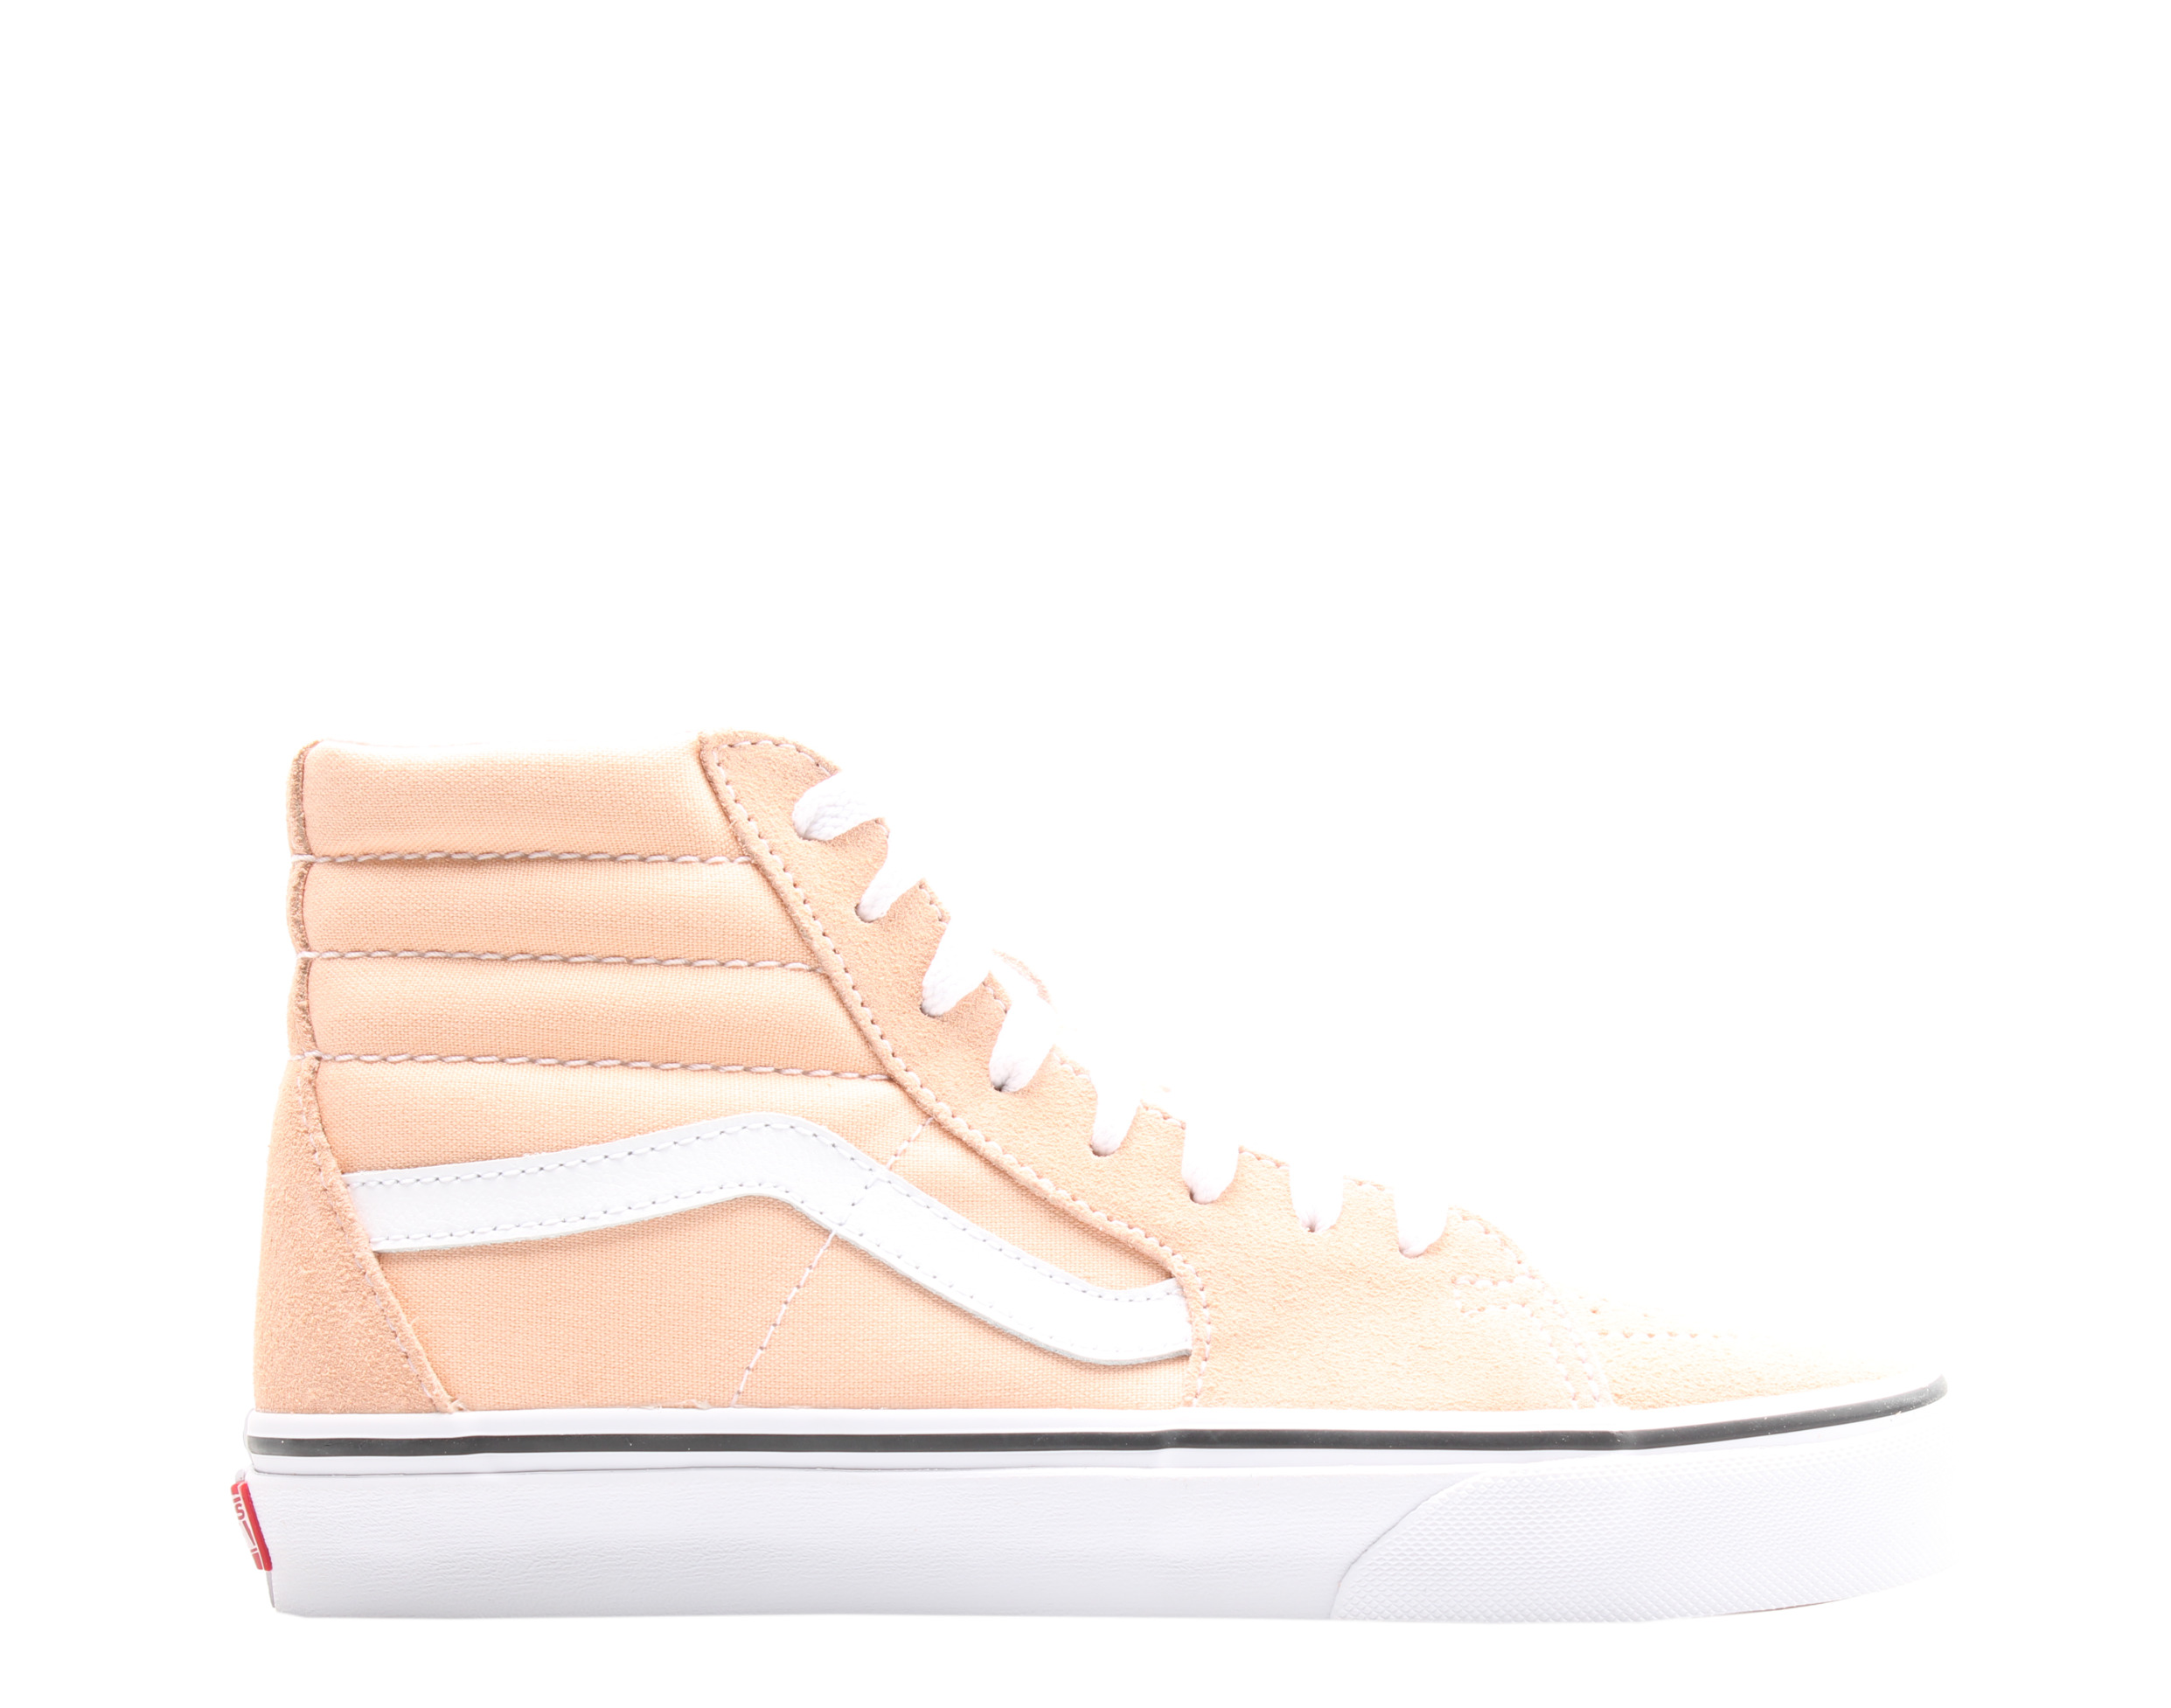 dentist combination Conqueror Vans Sk8-Hi Classic Bleached Apricot/White High Top Sneakers VN0A38GEU5Y